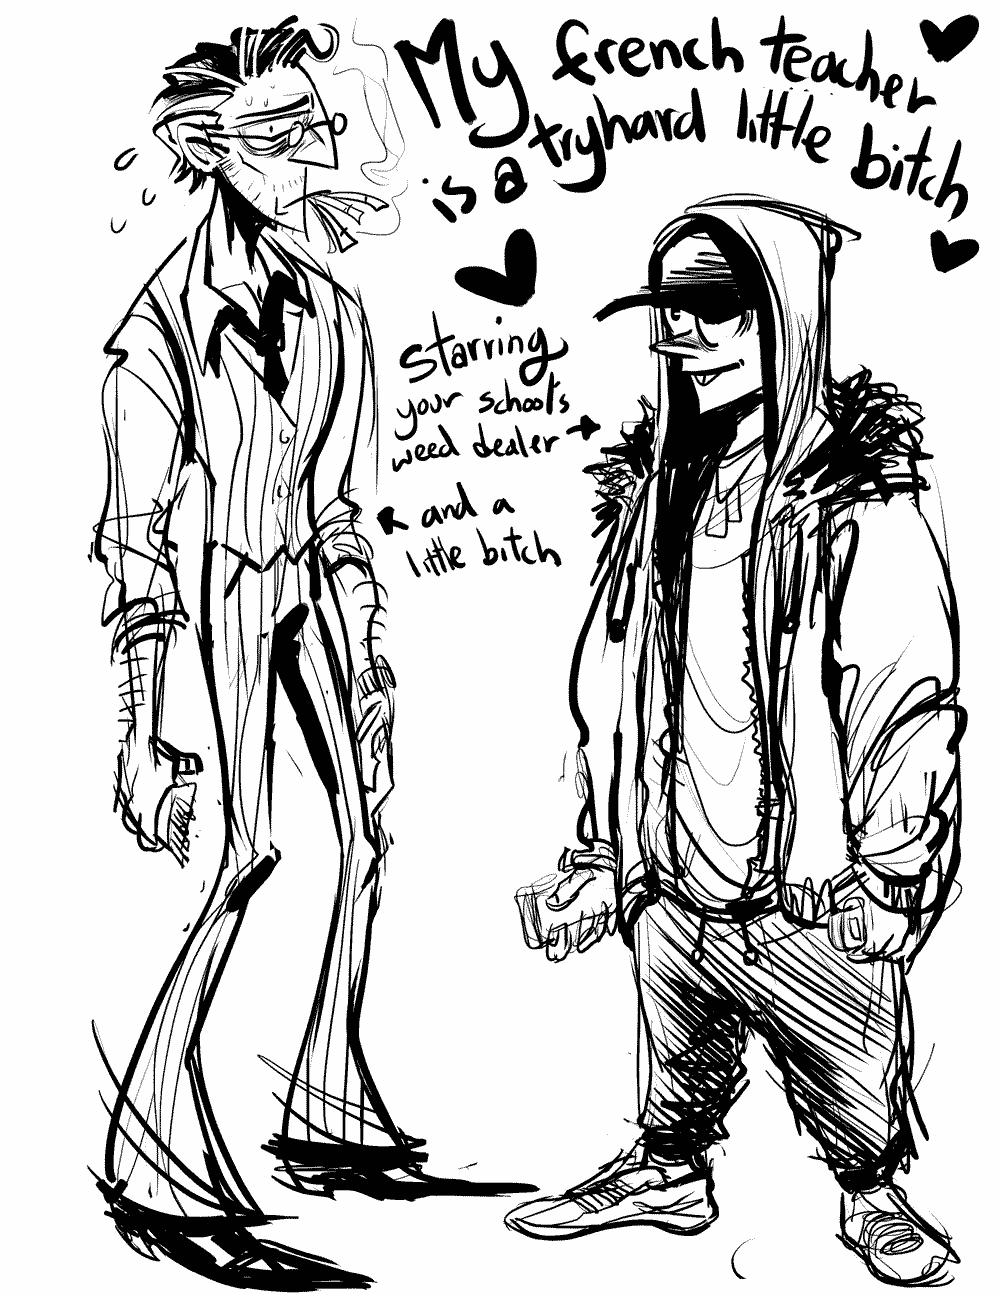 Old versions of Ollie and Basile standing next to each other nervously